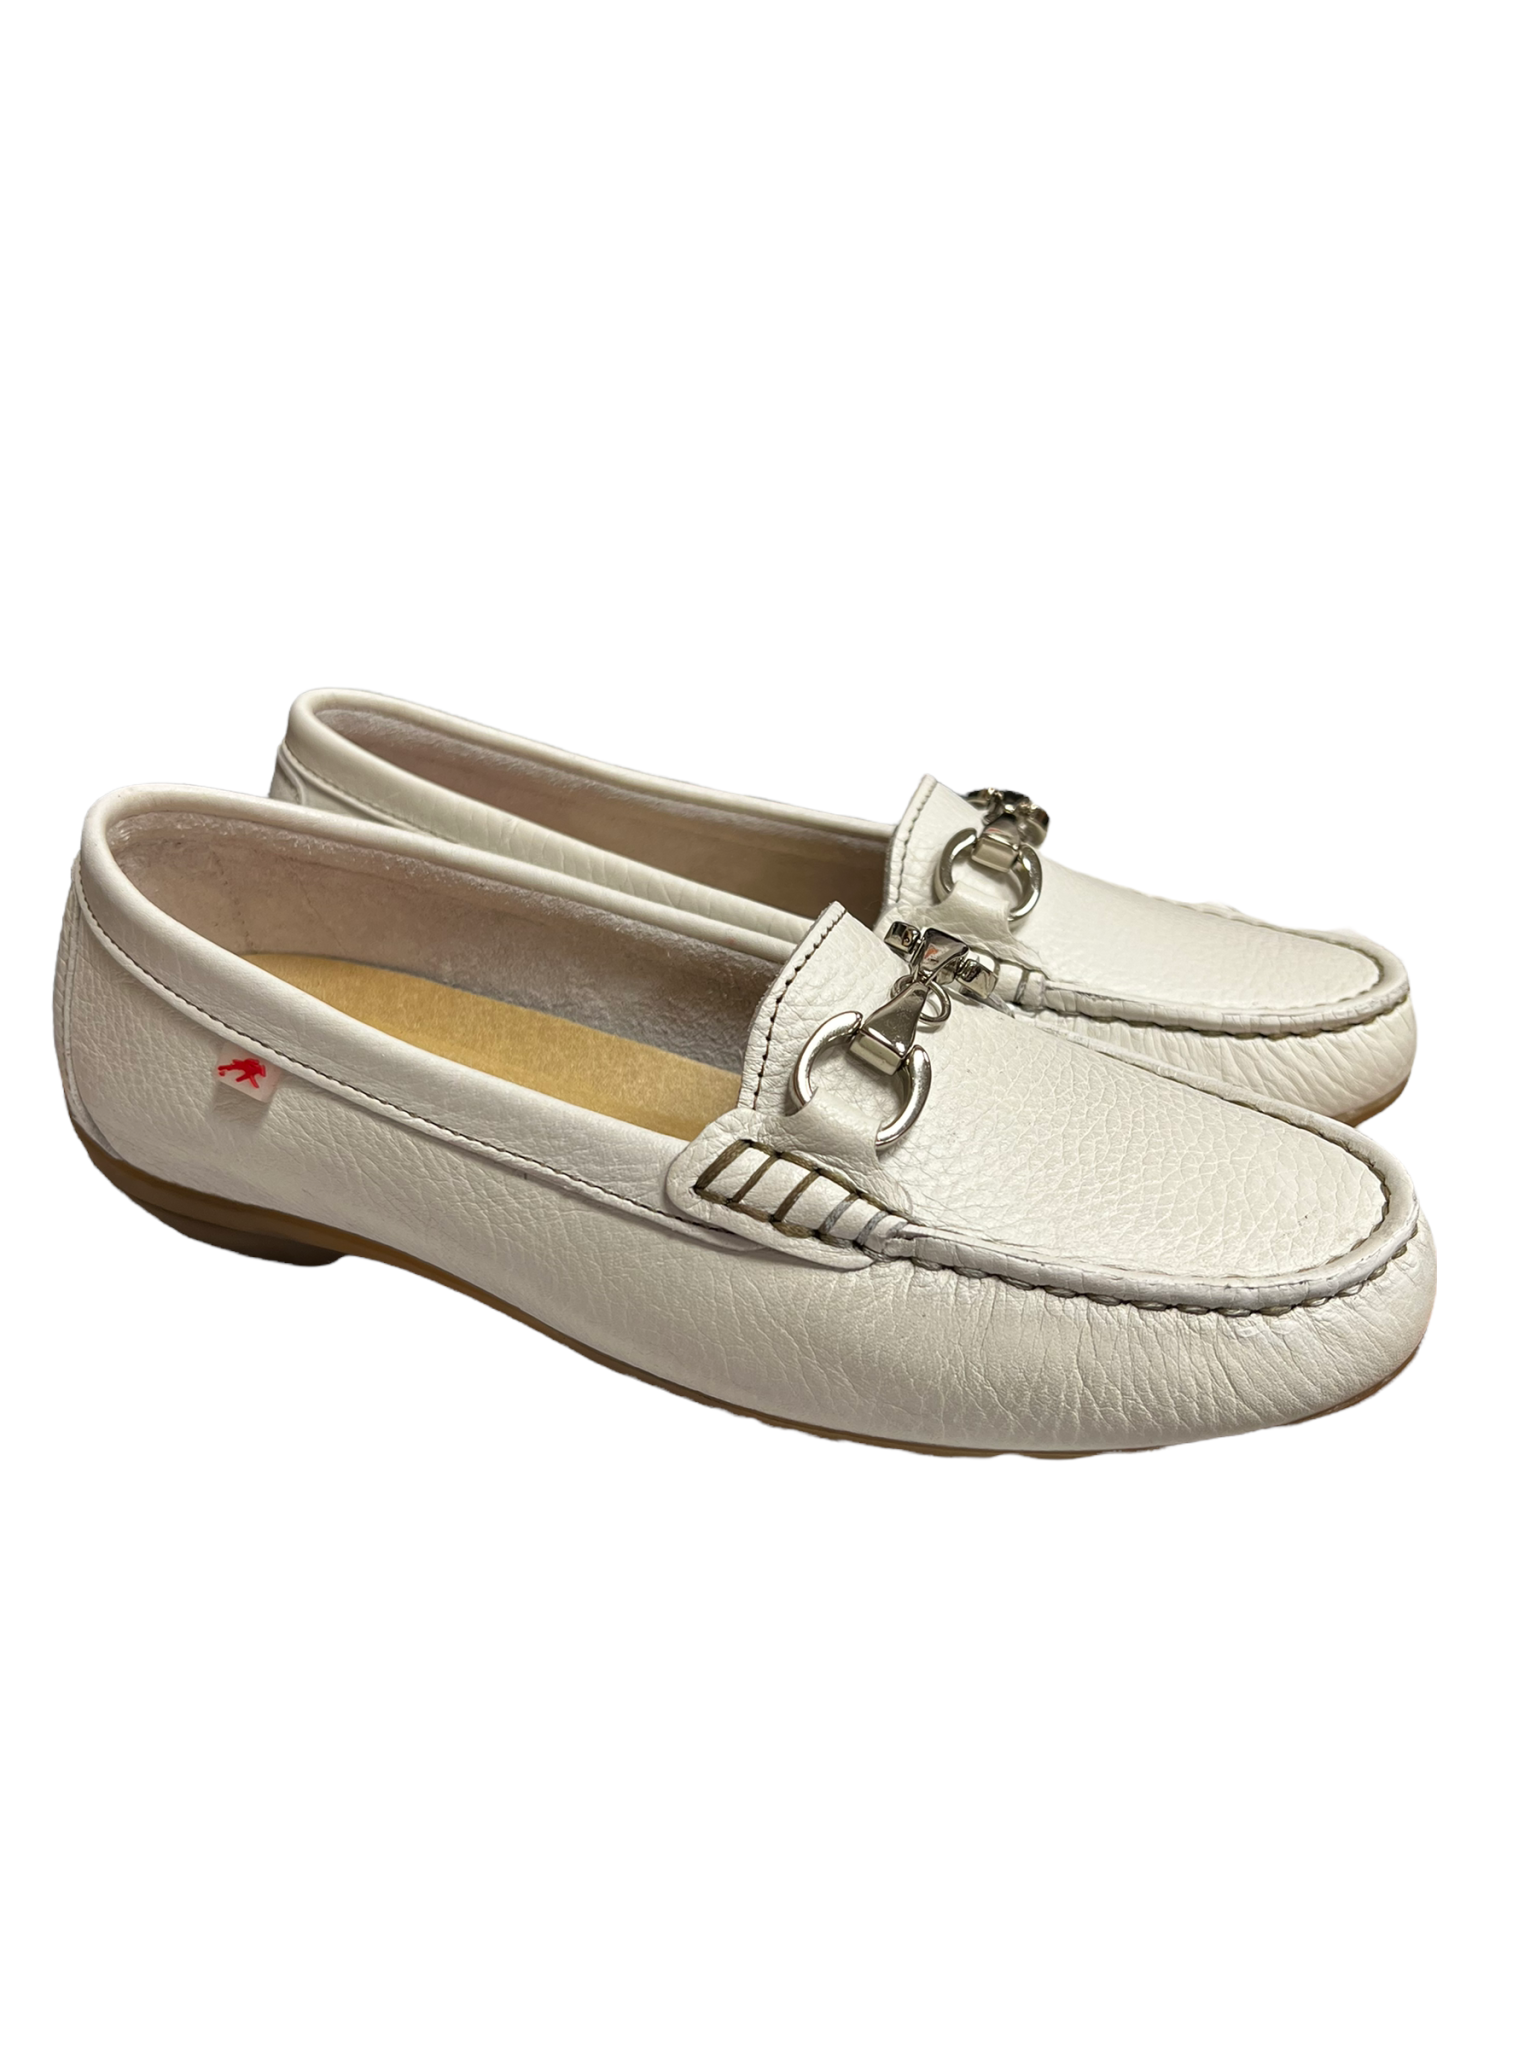 White Leather Loafers with Metal Clasp